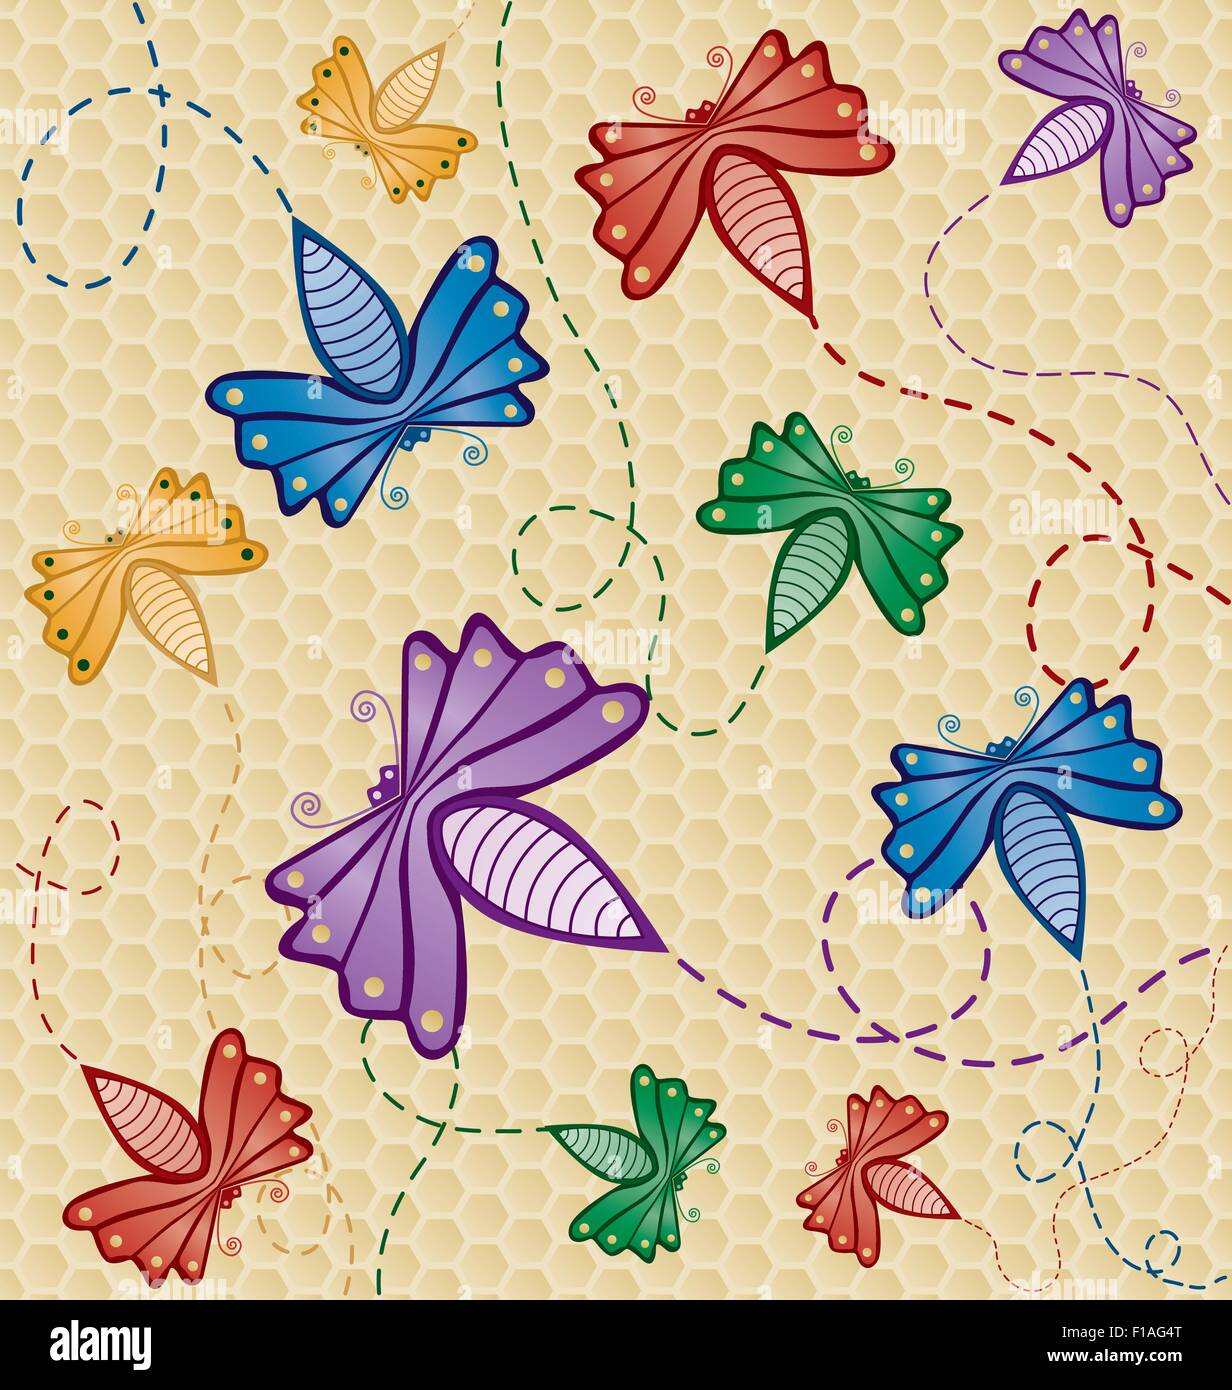 Colorful Flying Bugs, bugs and background are on separate layers for easy editing Stock Vector